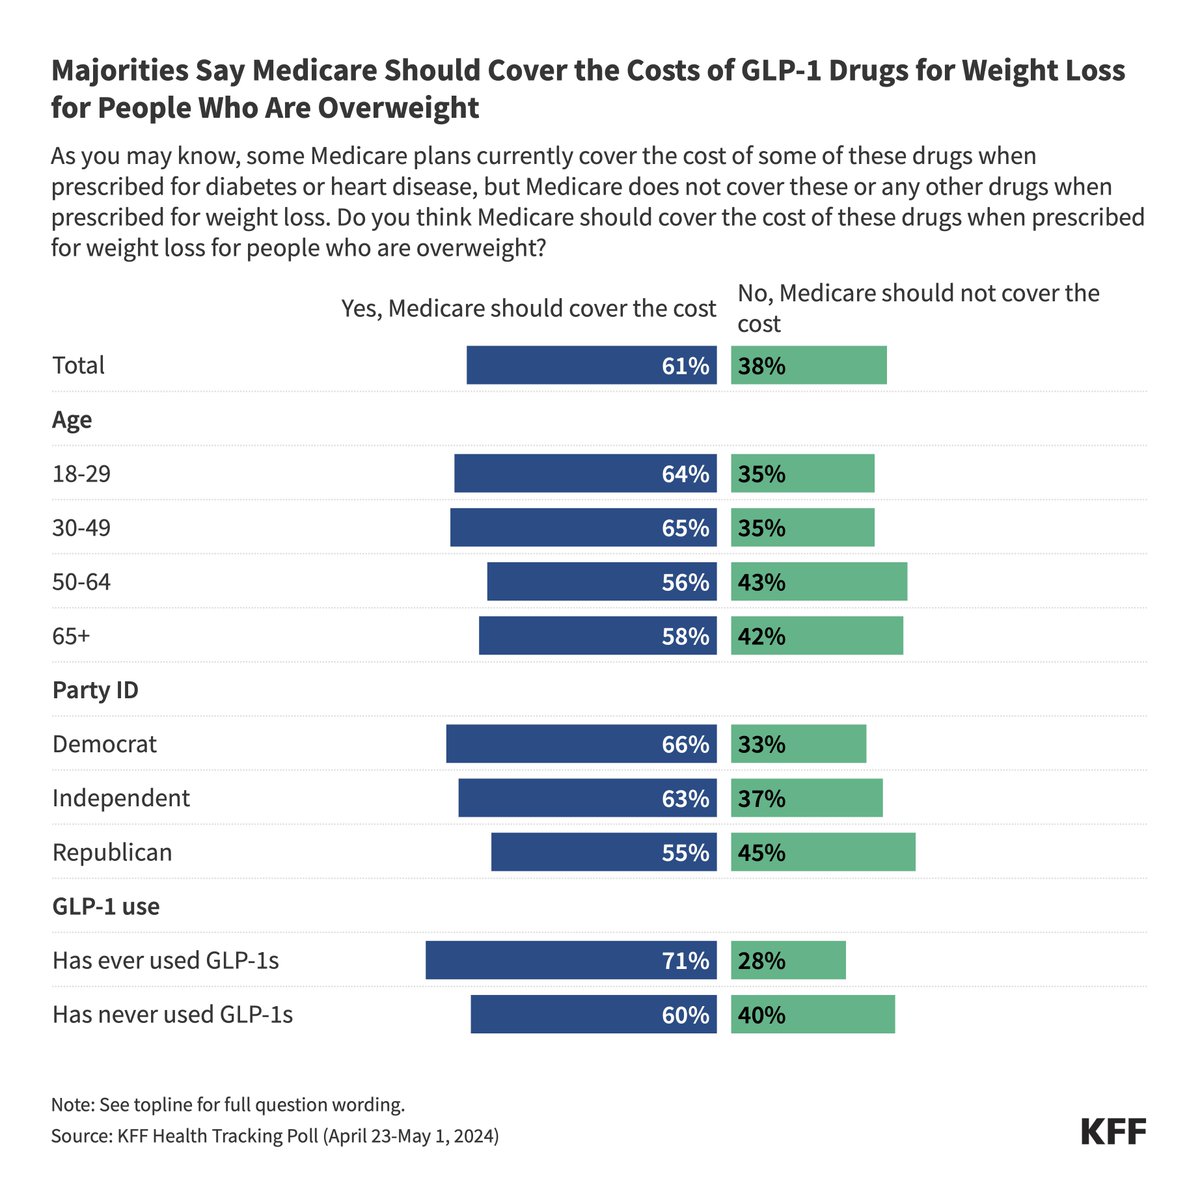 About 6 in 10 adults say that Medicare should cover GLP-1 drugs for people who are overweight when they’re prescribed for weight loss. This includes similar shares across age groups, and more than half of Democrats, independents, and Republicans. bit.ly/3JWEMQ4